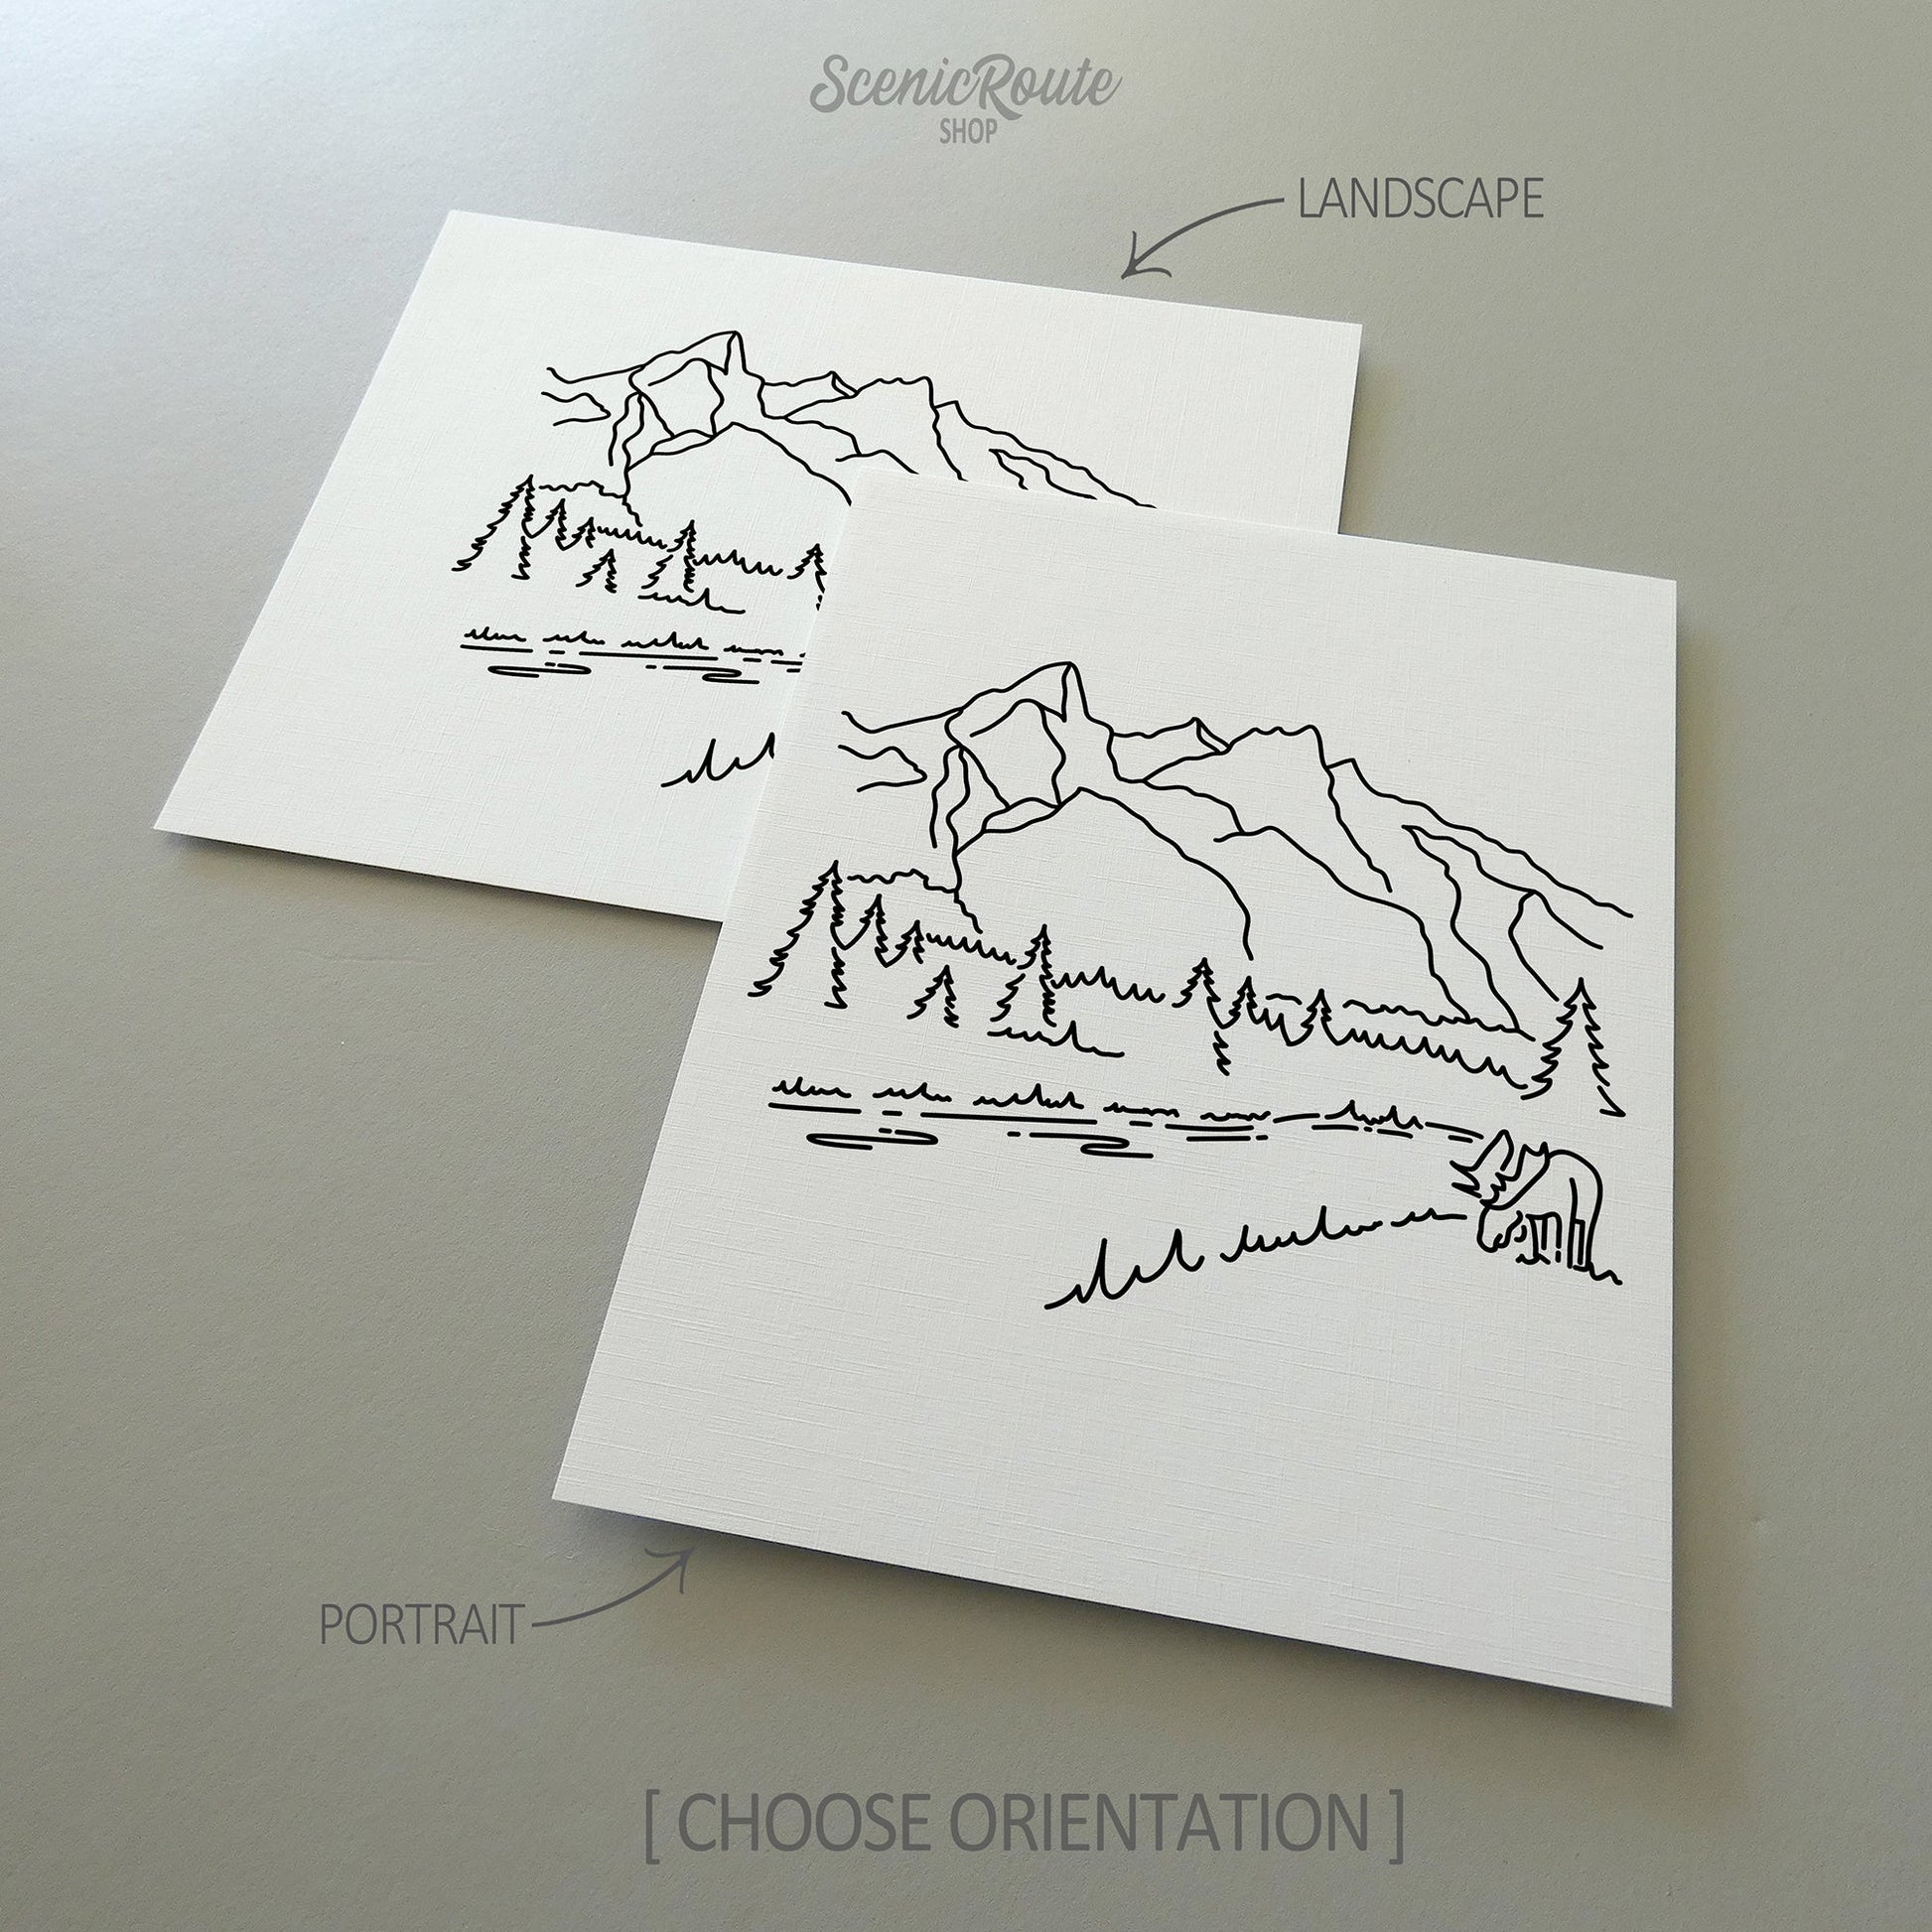 Two line art drawings of Grand Teton National Park on white linen paper with a gray background.  The pieces are shown in portrait and landscape orientation for the available art print options.